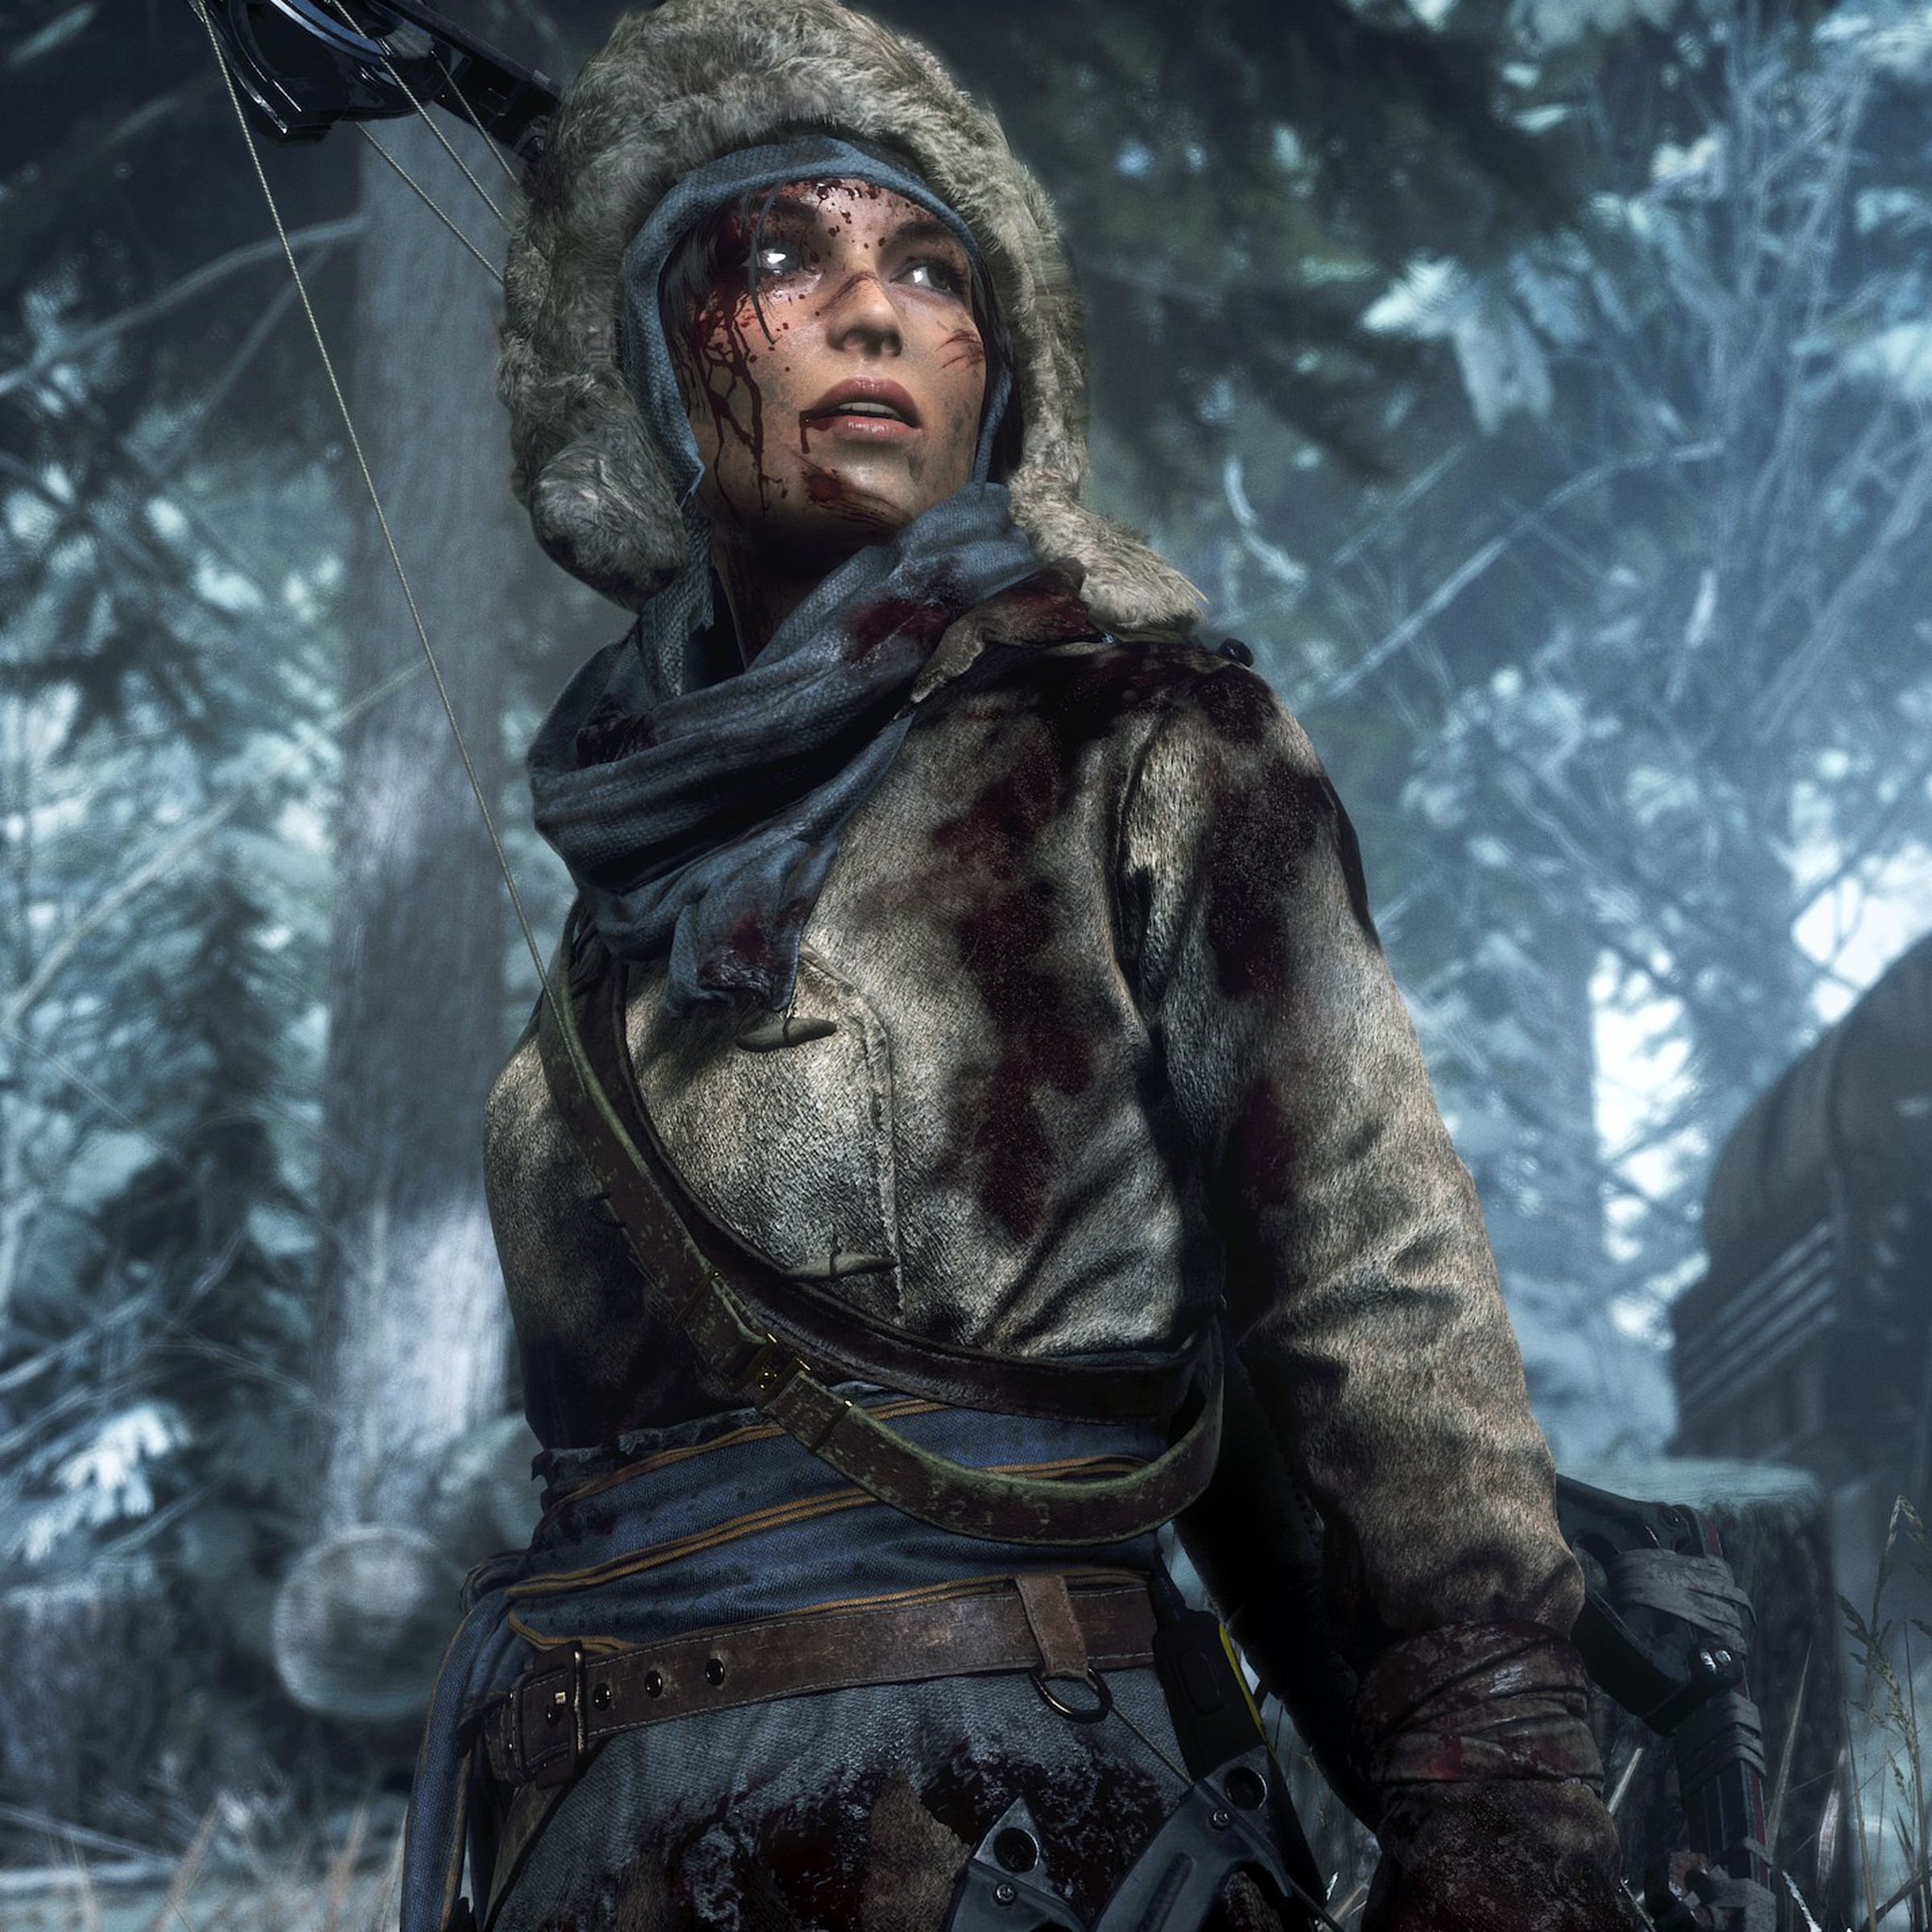 Screenshot from Rise of the Tomb Raider featuring Lara Croft covered in blood and bundled in a fur coat in a frozen wilderness